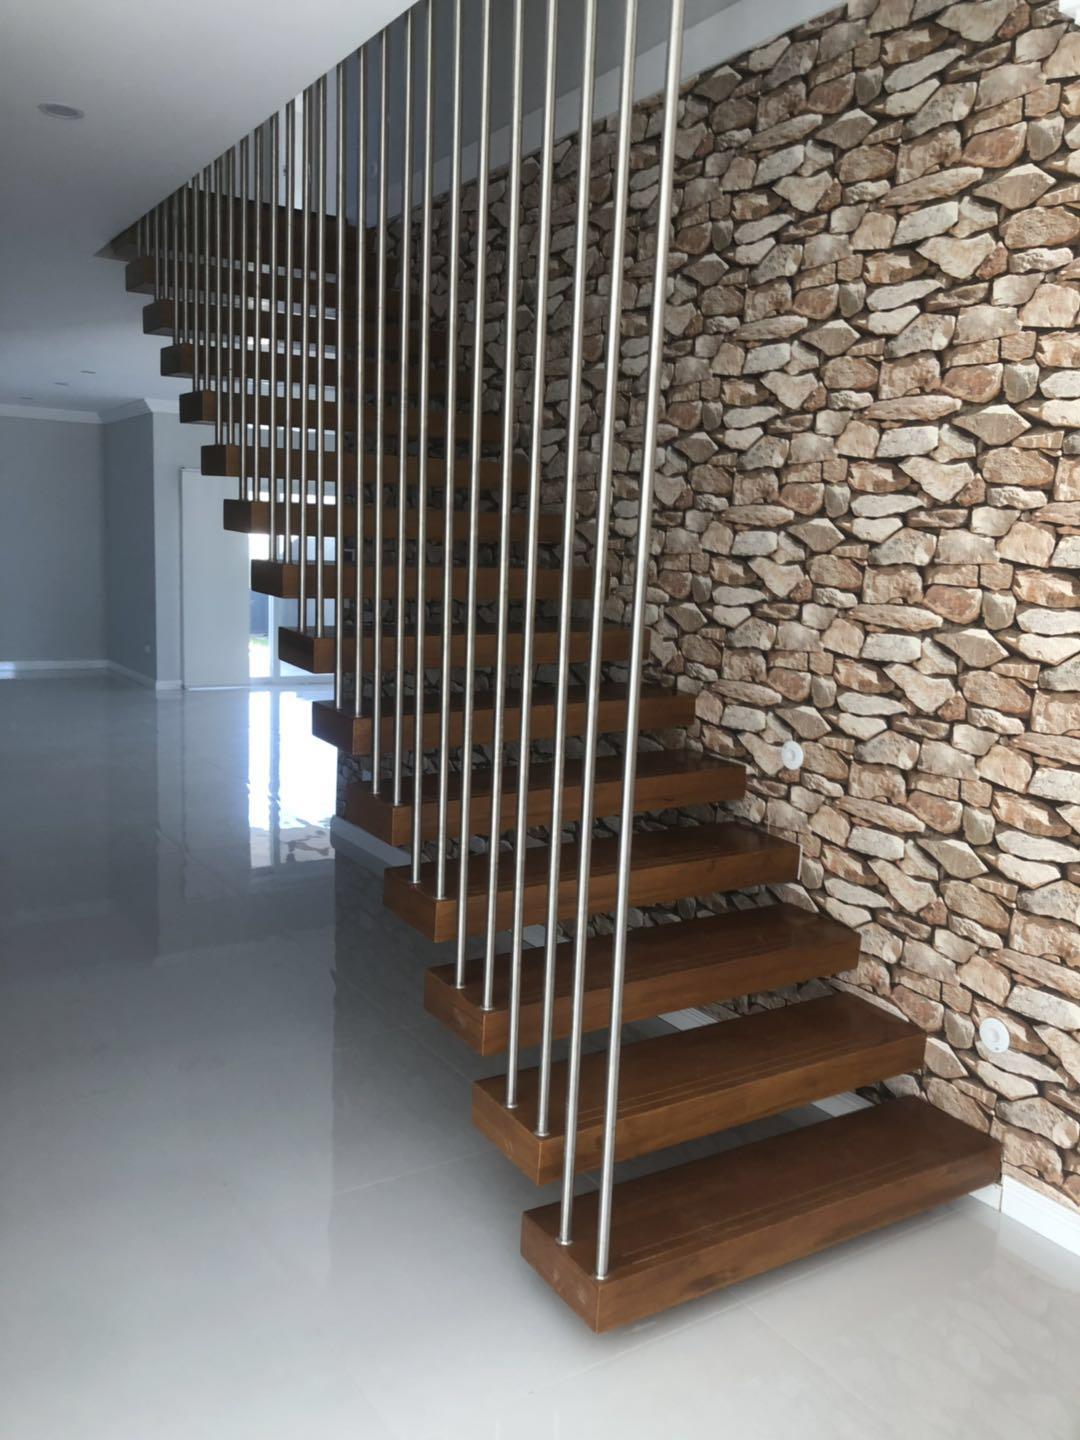 YUDI Stairs floating steps cost for office building